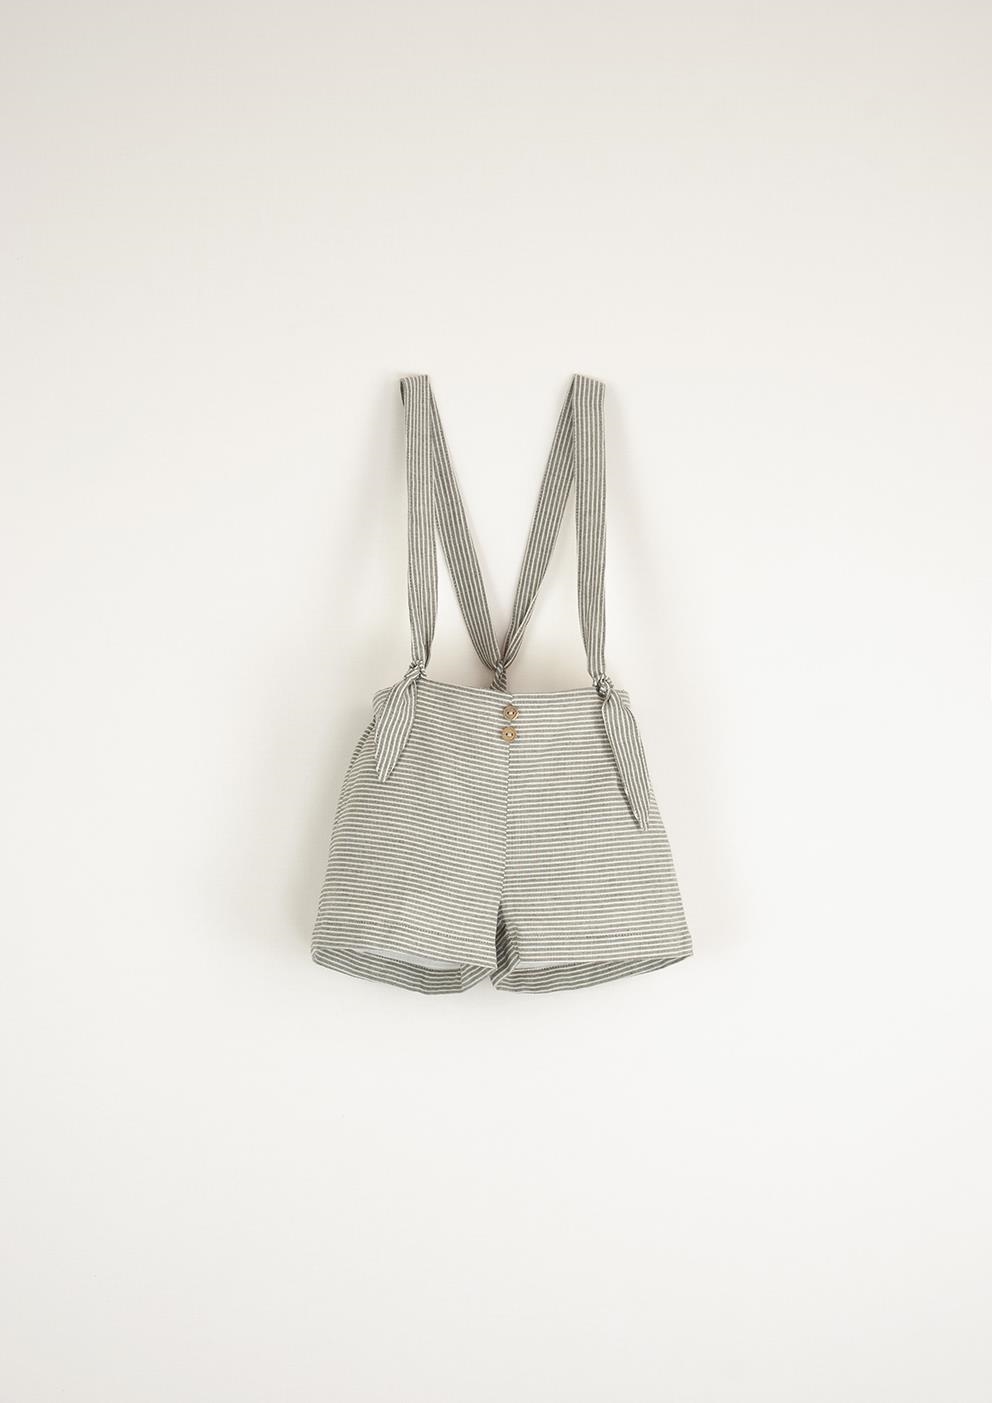 Mod.15.3 Striped dungarees with removable straps | SS23 Mod.15.3 Striped dungarees with removable straps